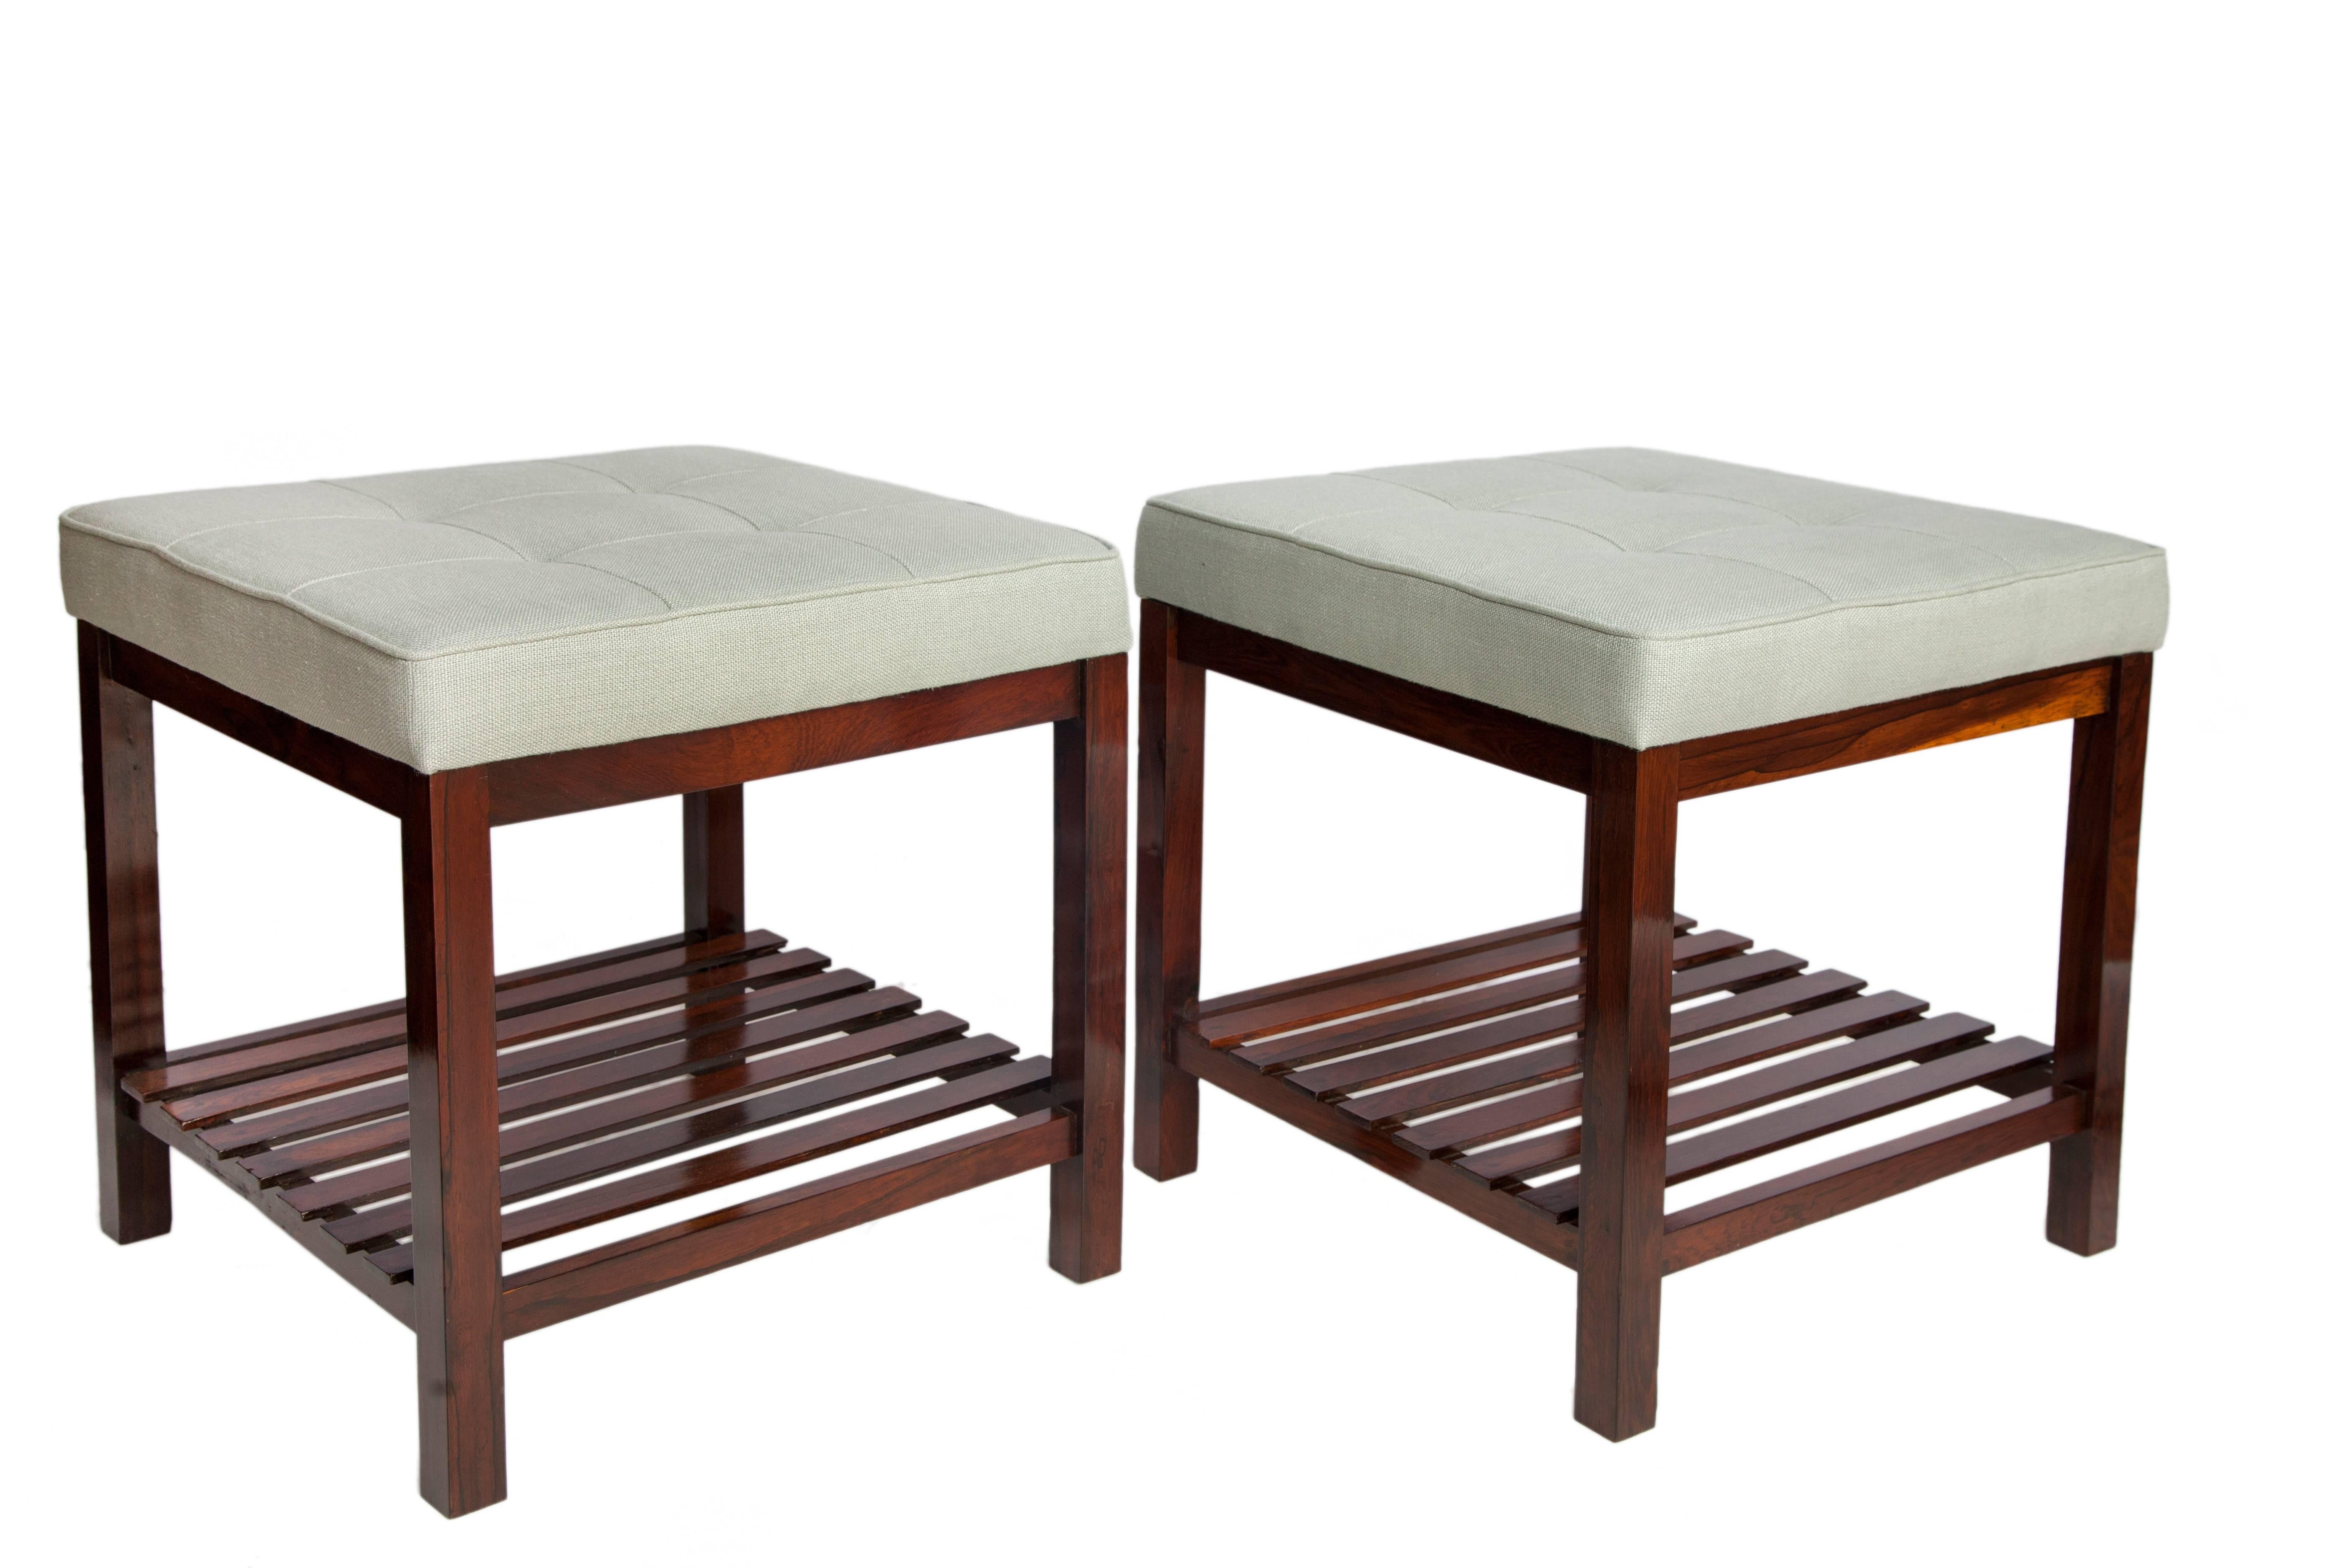 Mid-Century Modern stools in Brazilian jacaranda with slatted lower shelf. Each is recently reupholstered in light green tufted linen. The stools remain in good vintage condition and have wear consistent with age and use. Listed dimensions are per